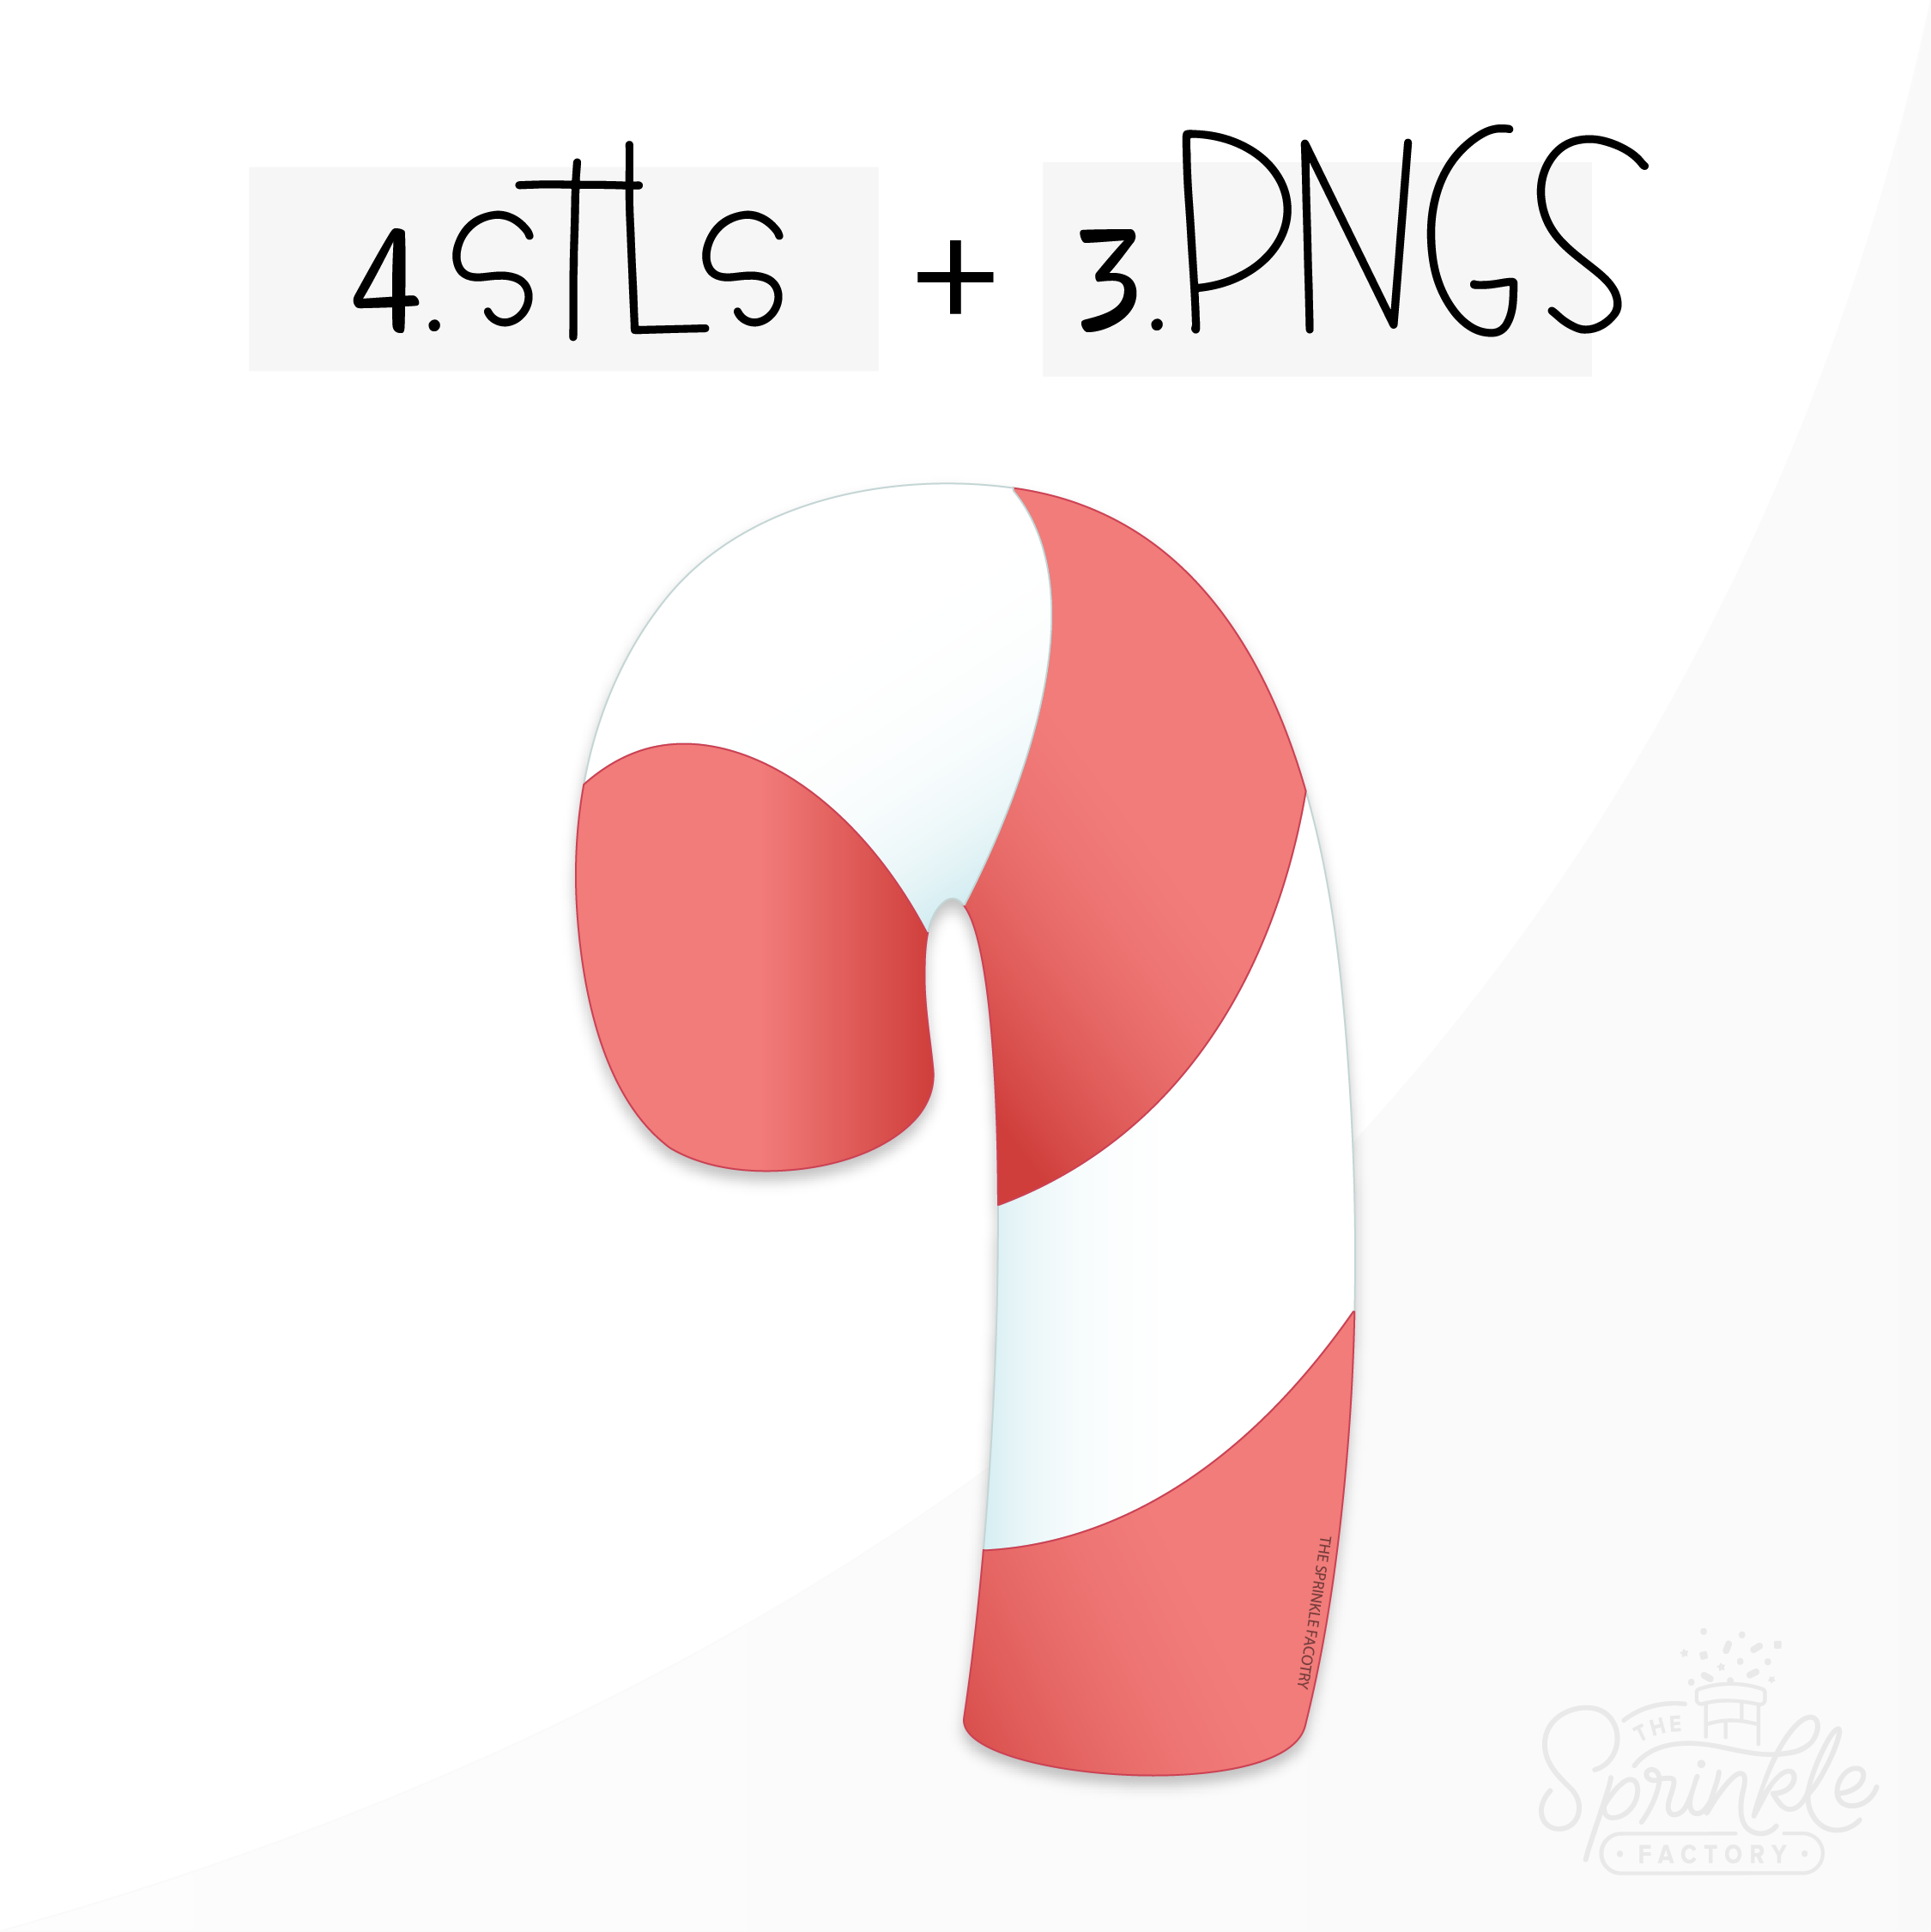 Clipart of a classic red and white thick stripped candy cane facing left.